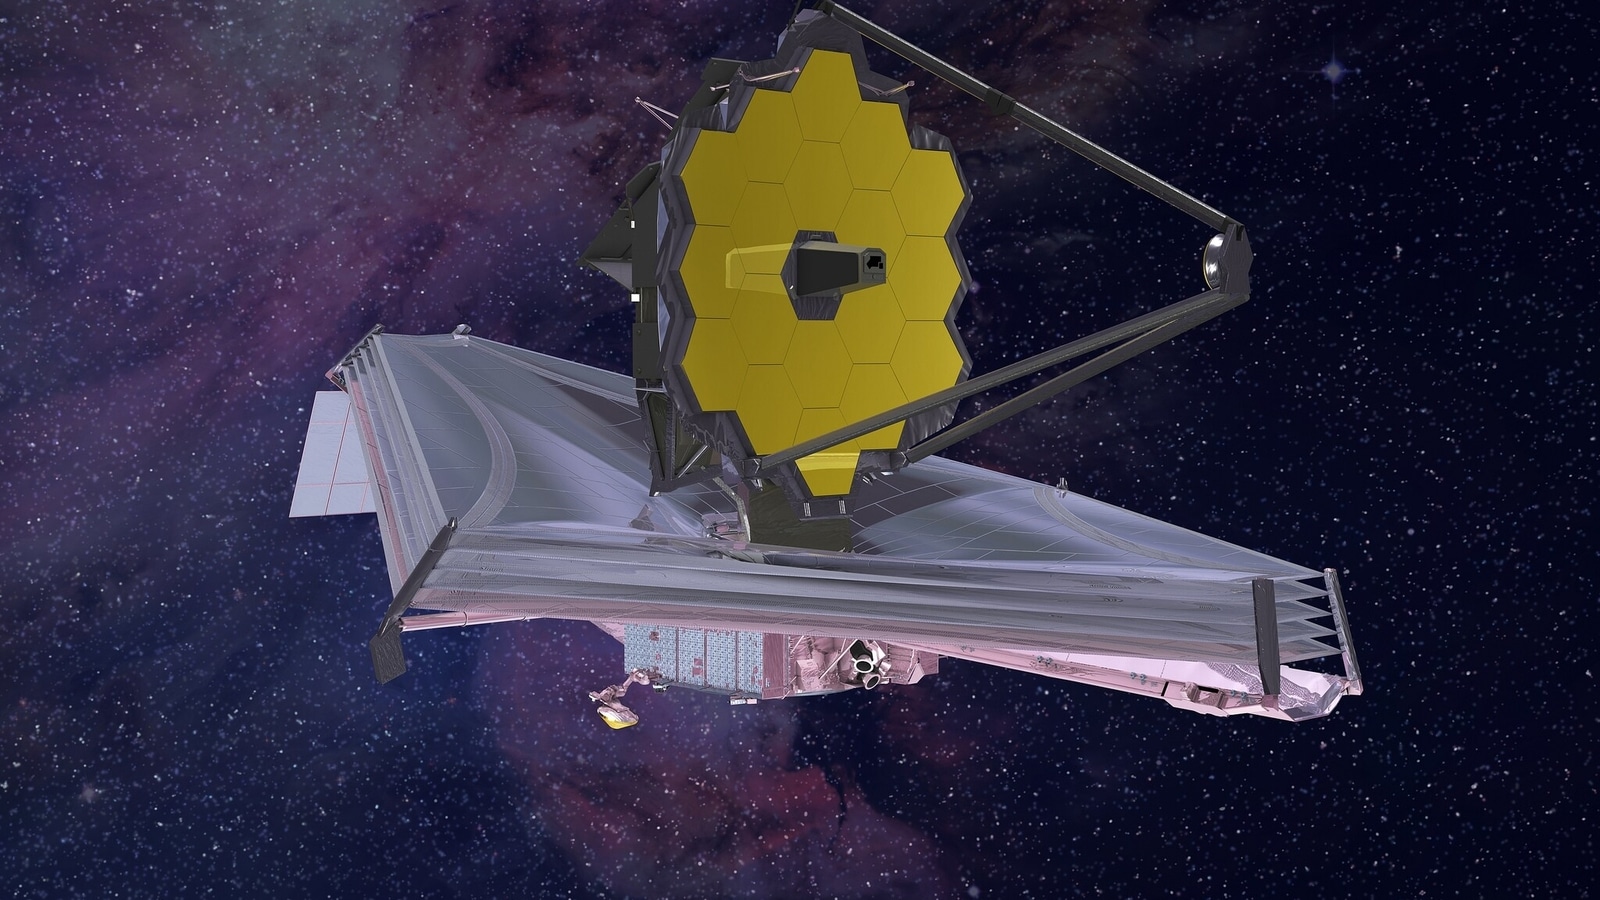 James Webb Space Telescope Finally In Space! What’s Next? First Images